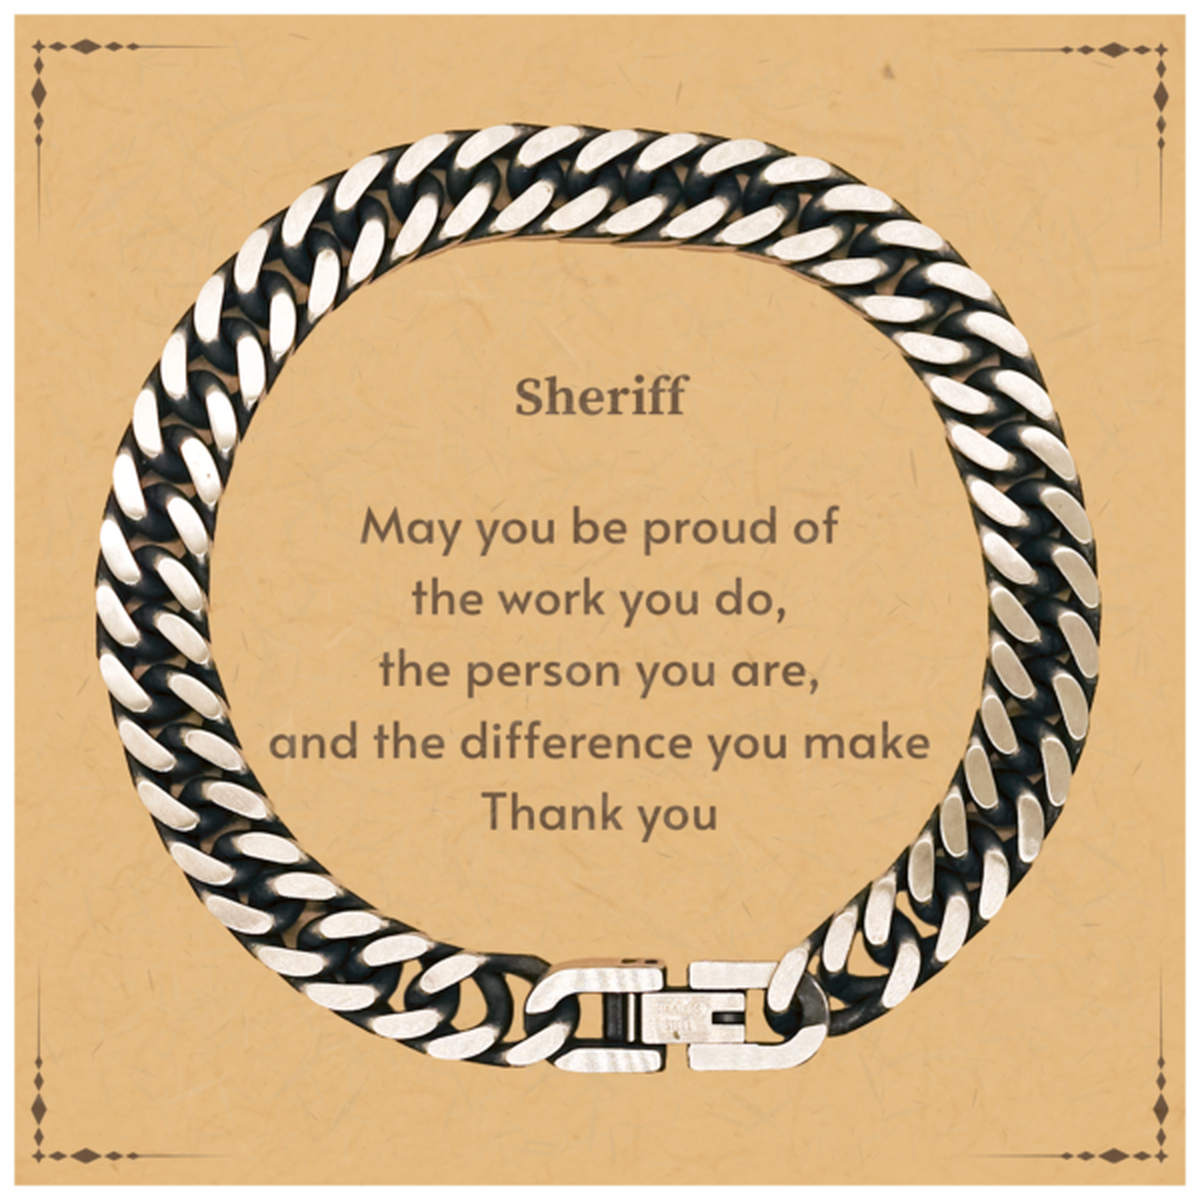 Heartwarming Cuban Link Chain Bracelet Retirement Coworkers Gifts for Sheriff, Sheriff May You be proud of the work you do, the person you are Gifts for Boss Men Women Friends